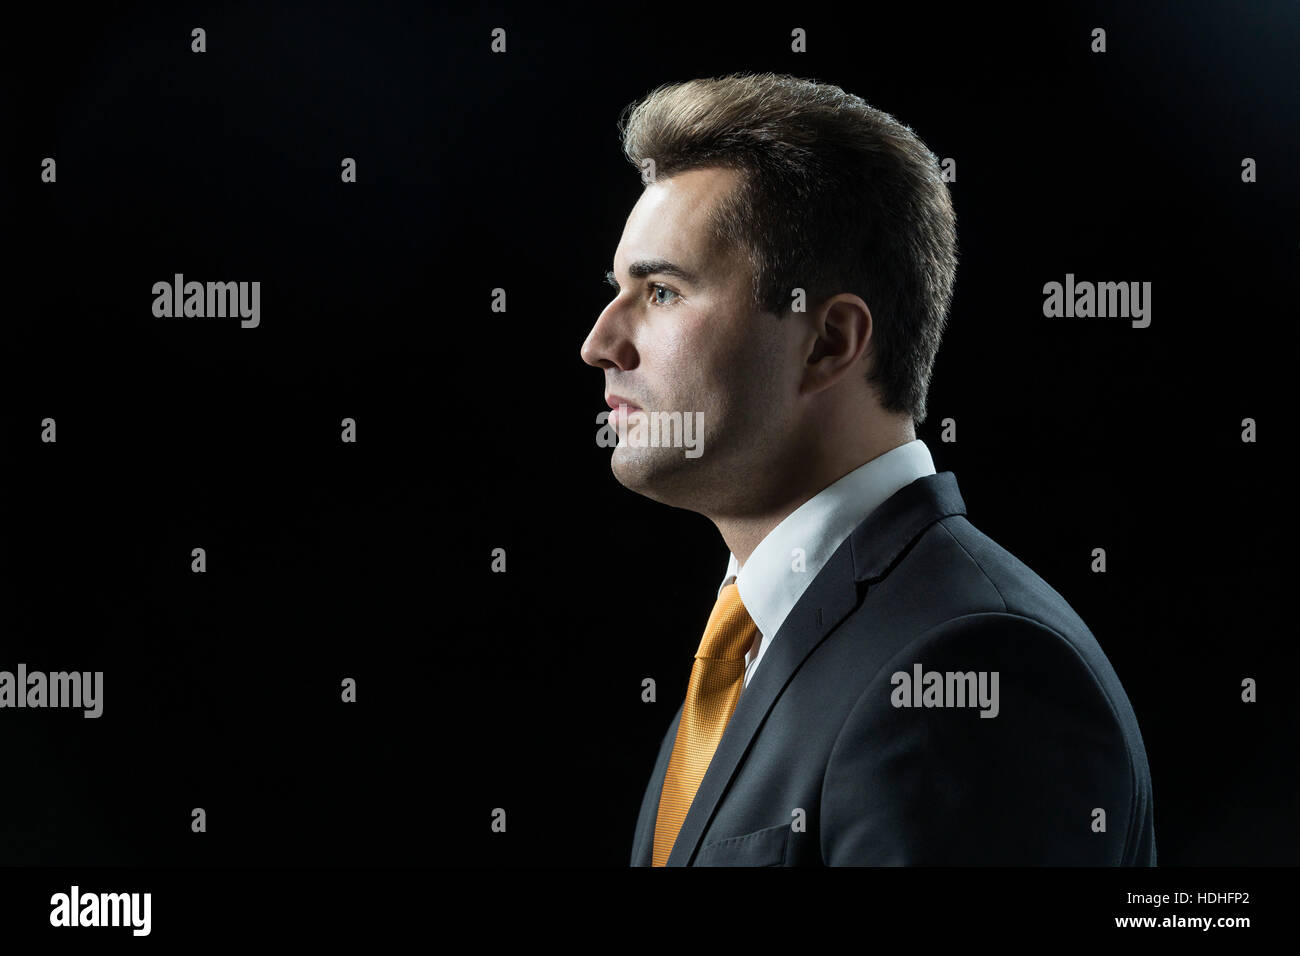 Side view of thoughtful businessman against black background Stock Photo